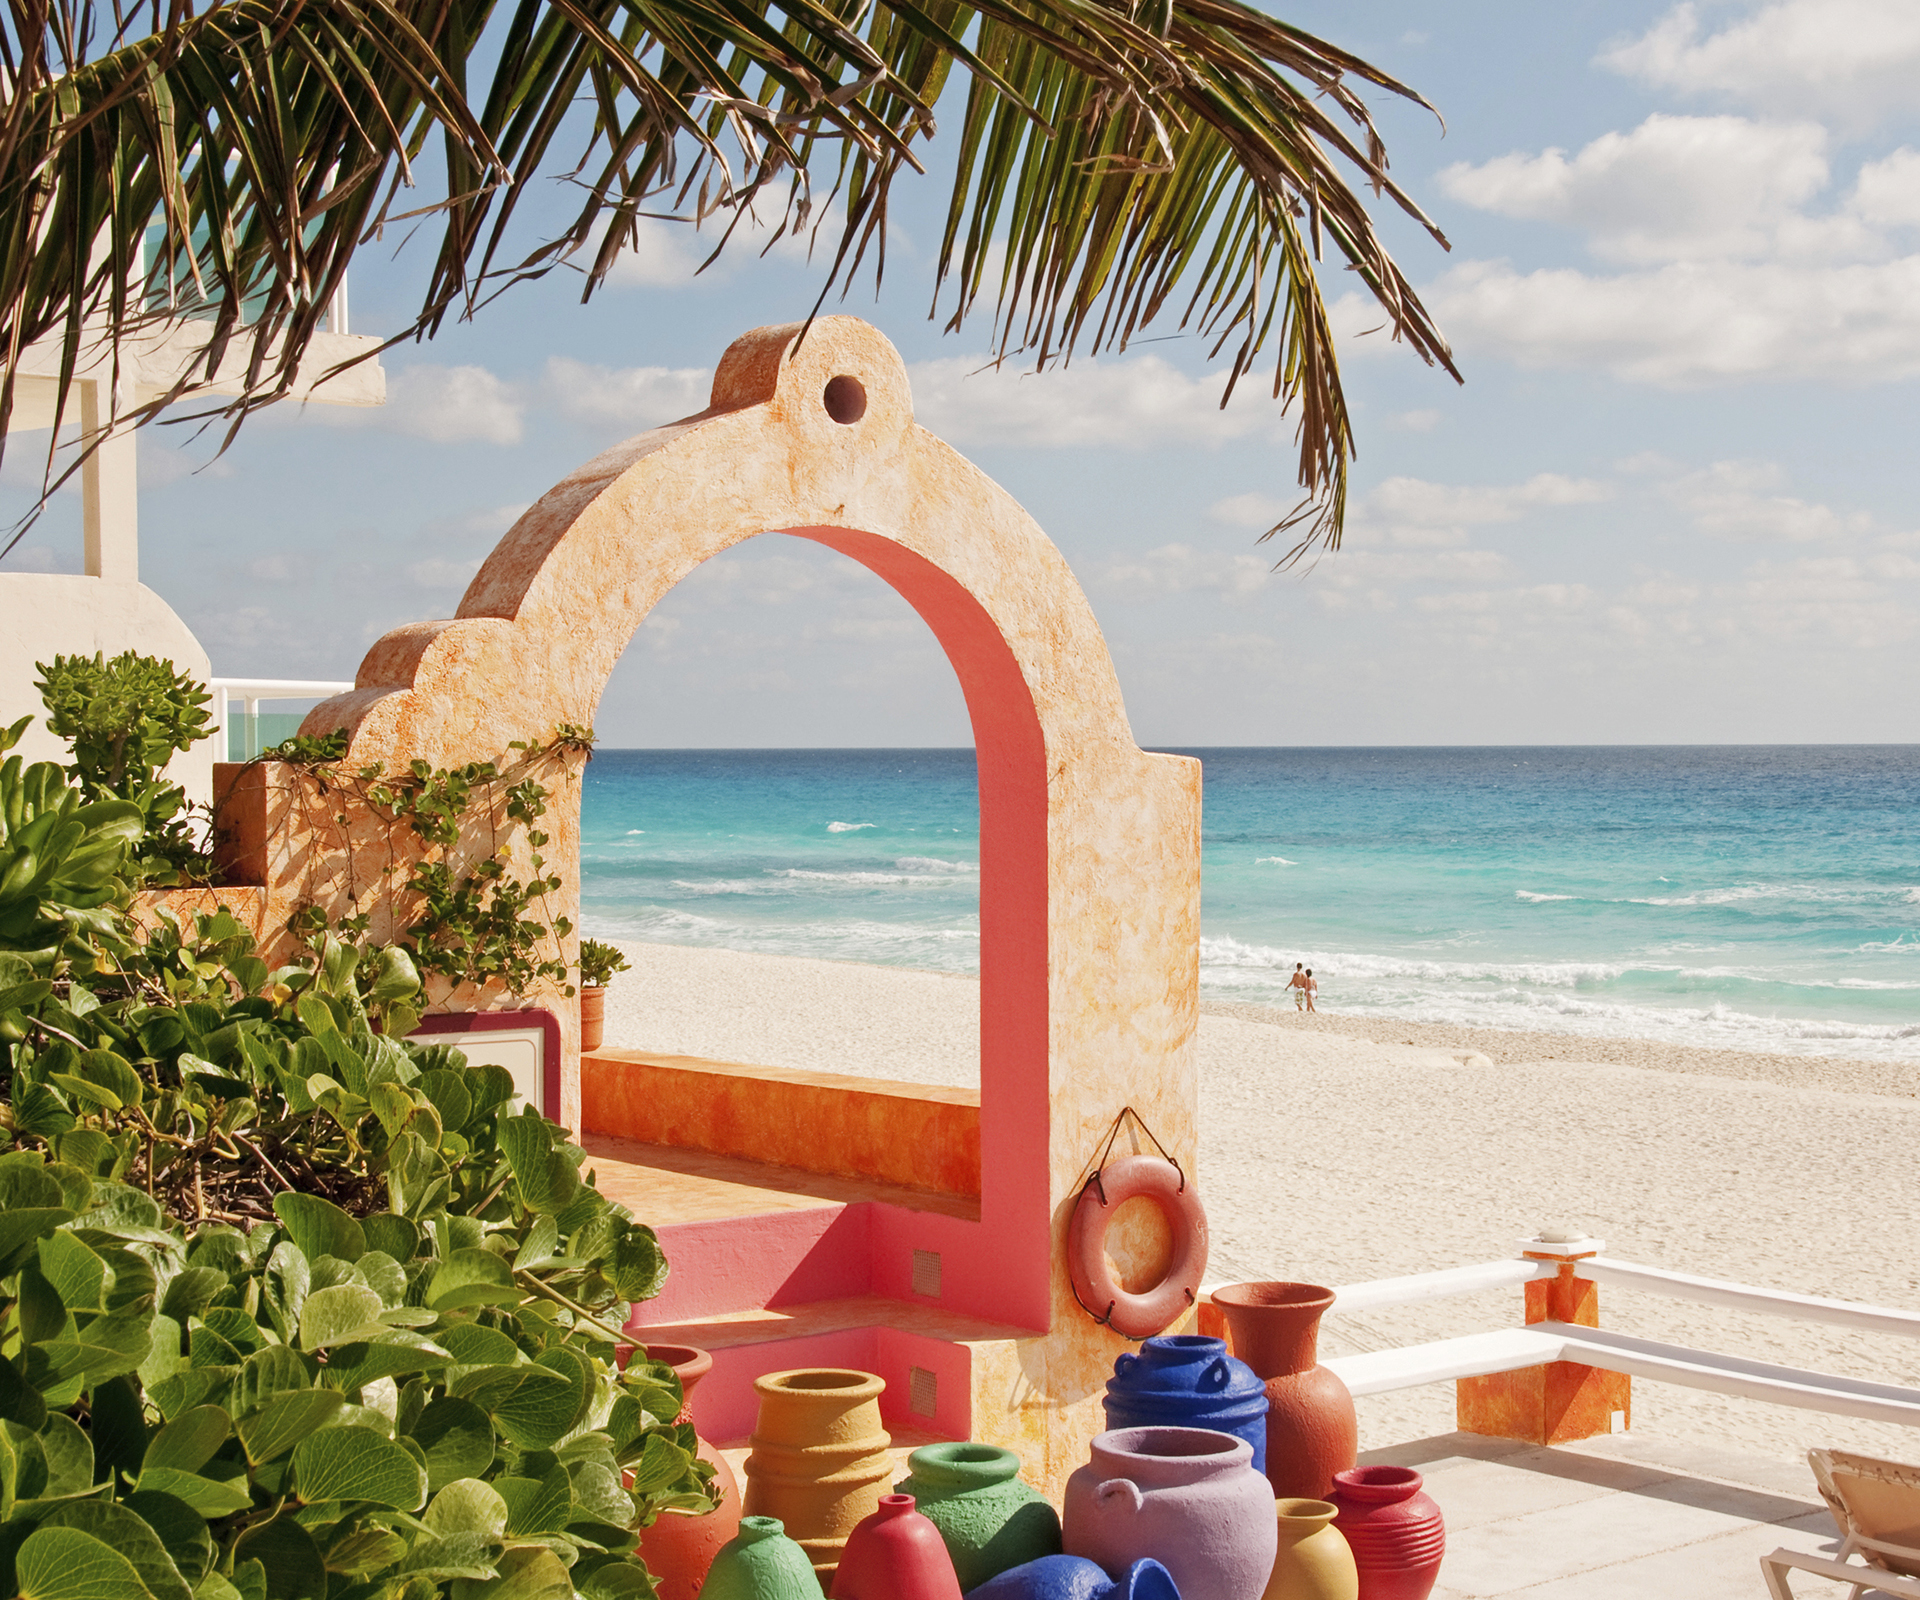 Our travel guide to Mexico’s new Cancún